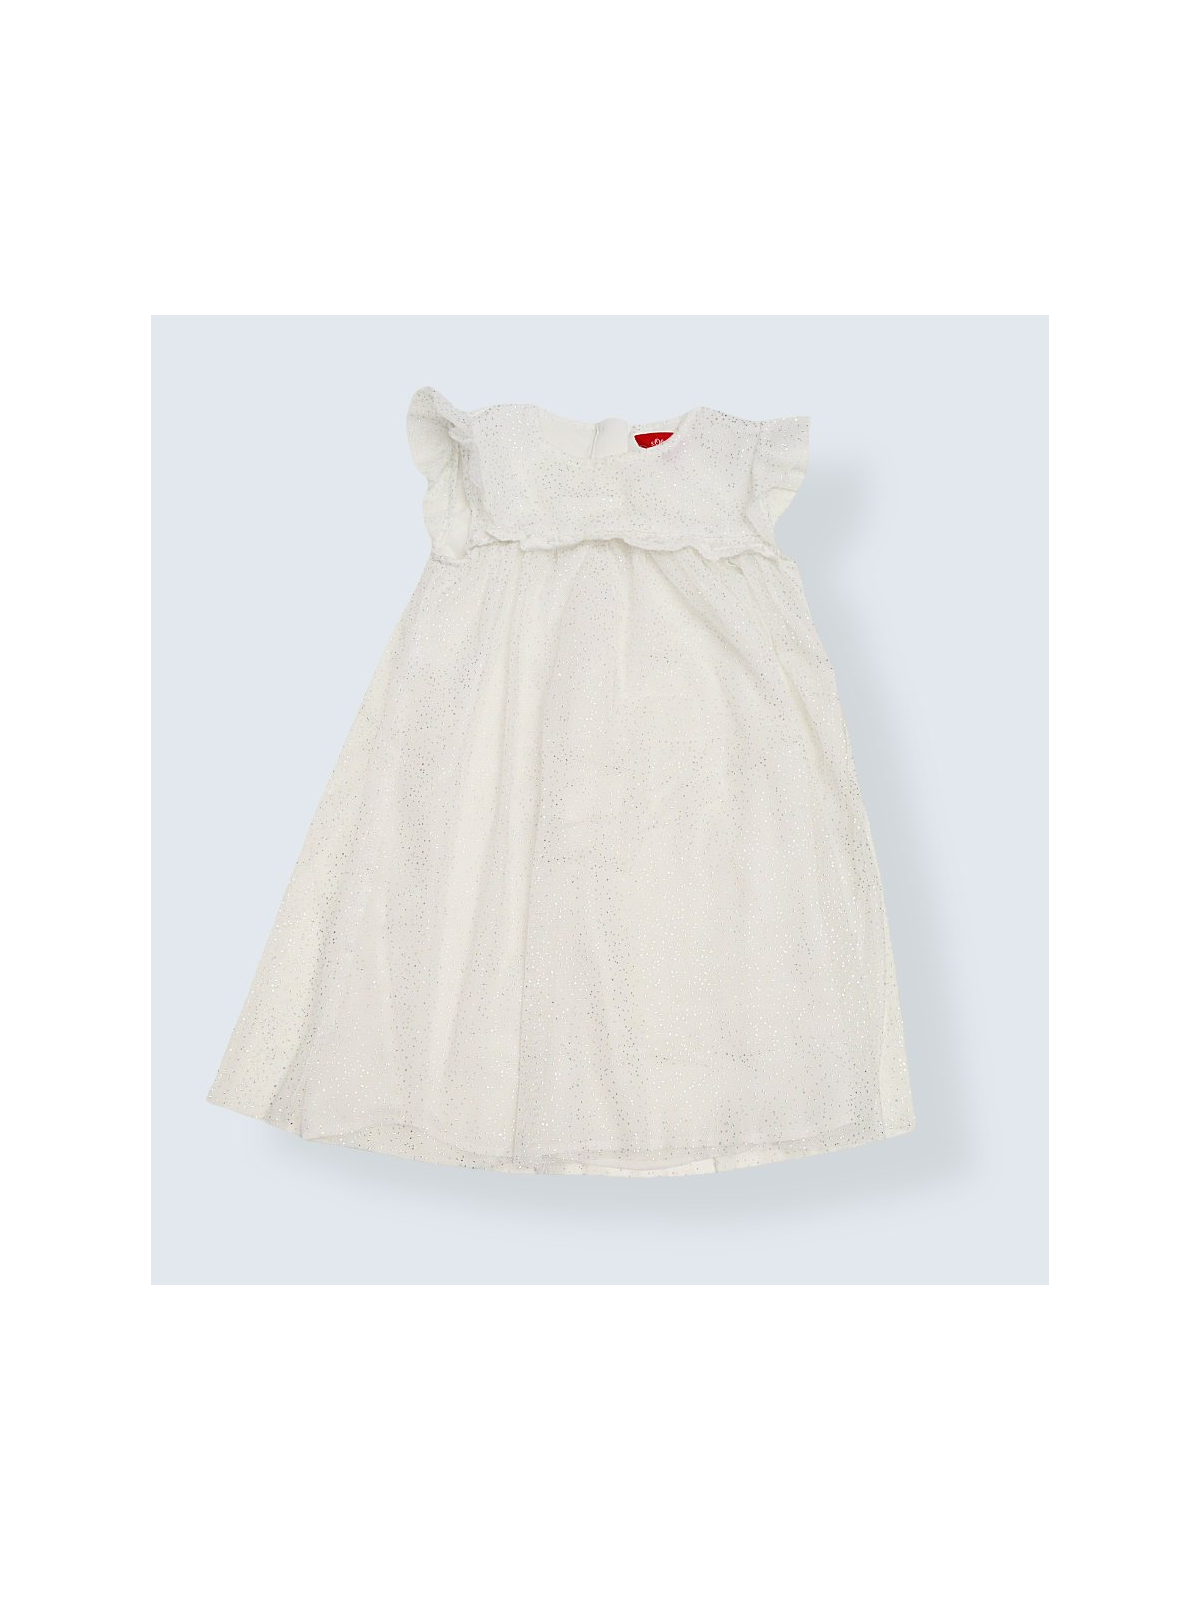 Robe d'occasion S. Oliver 18 Mois pour fille.